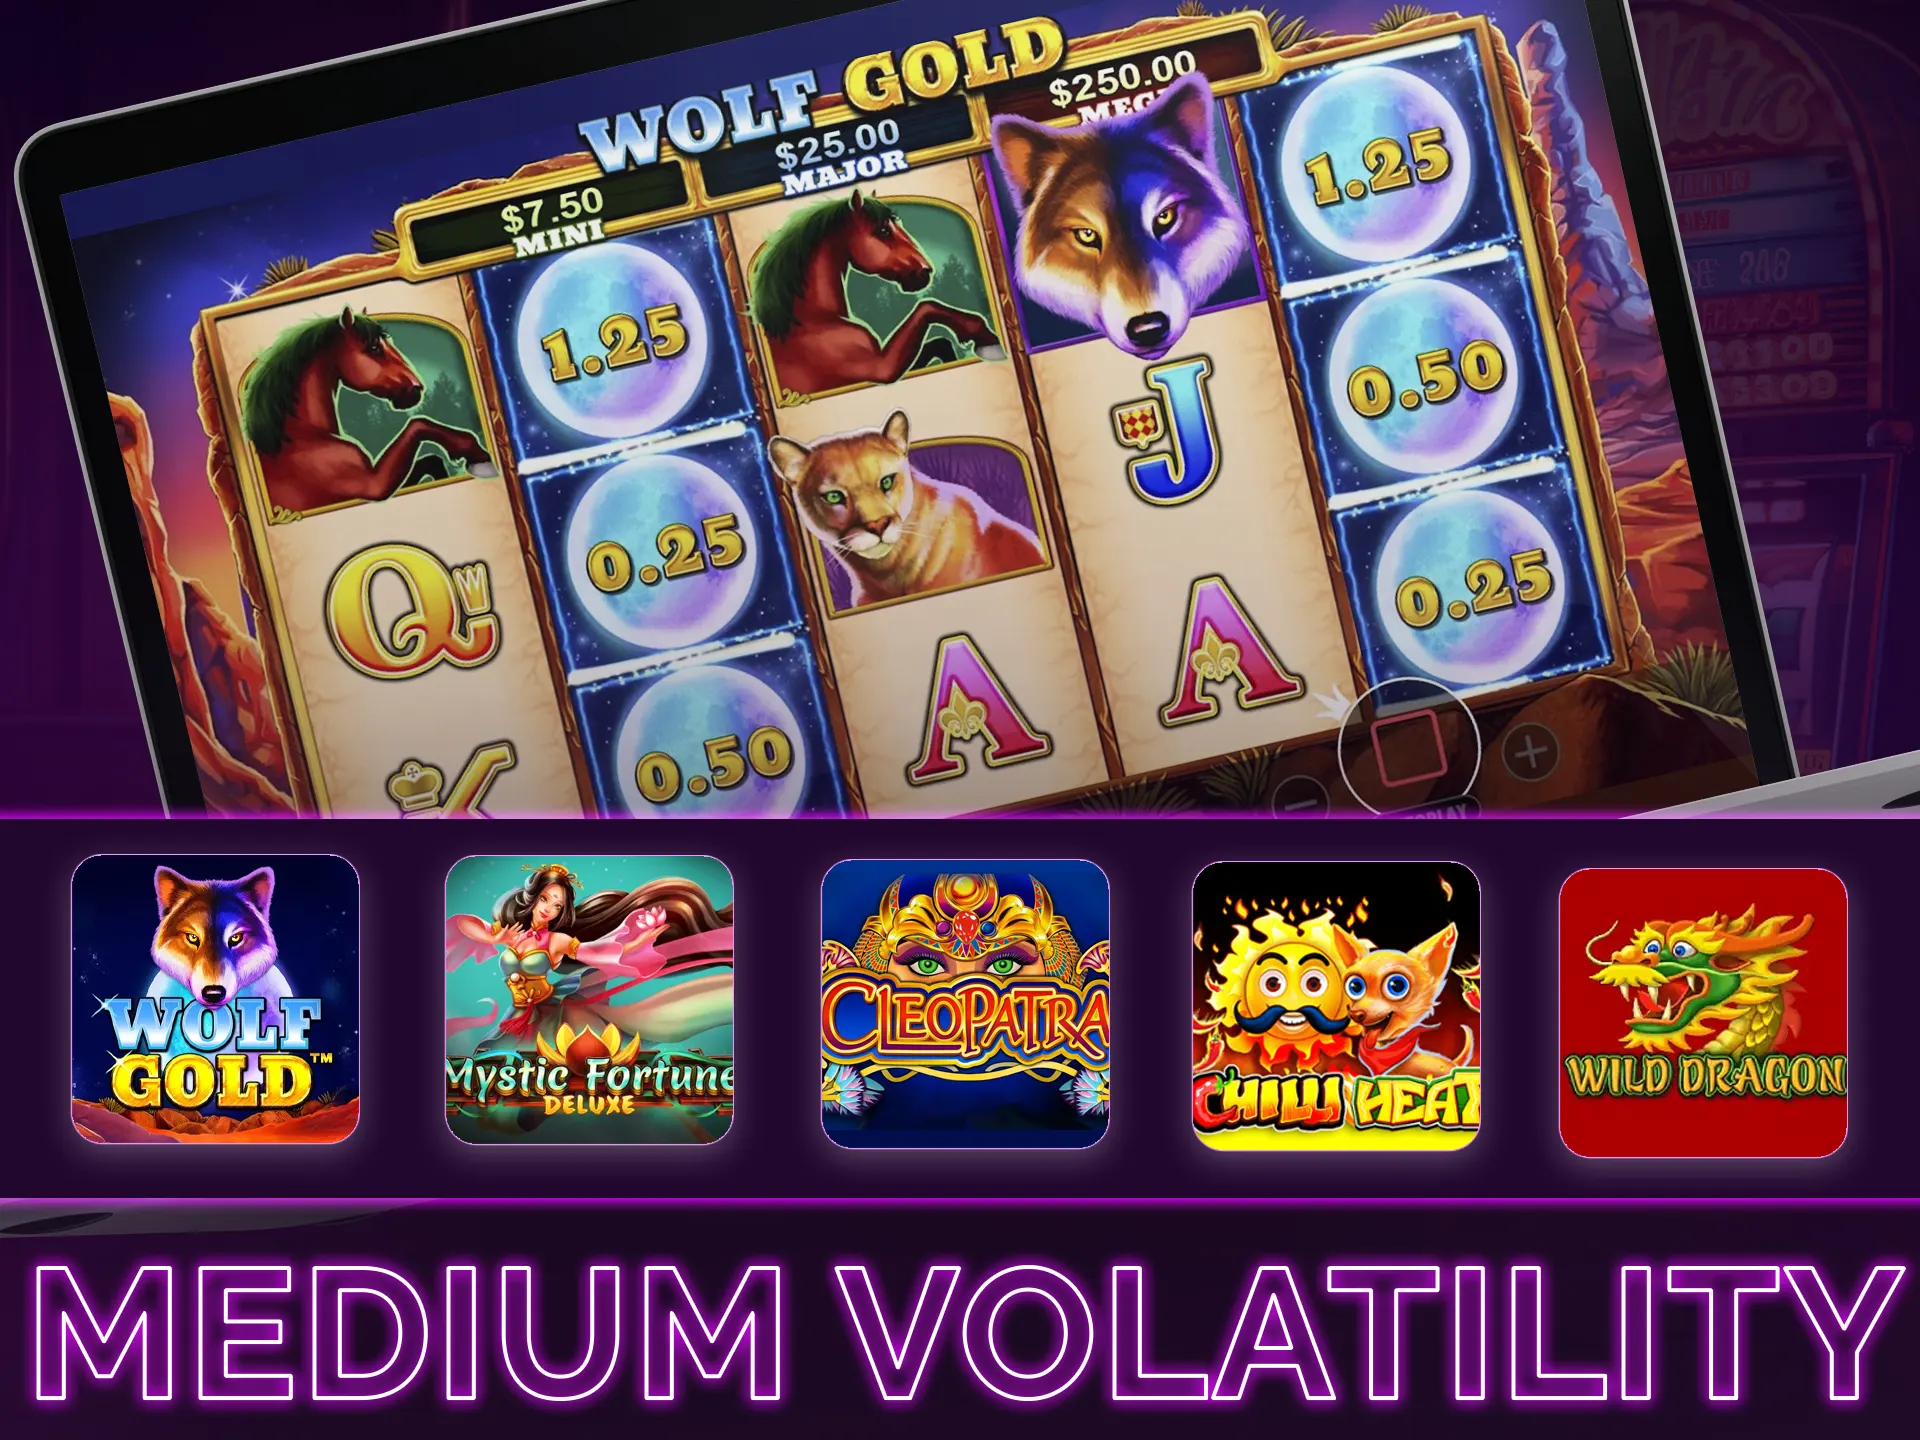 Medium volatility in slots: frequent wins, moderate risk, max payout around x10,000.